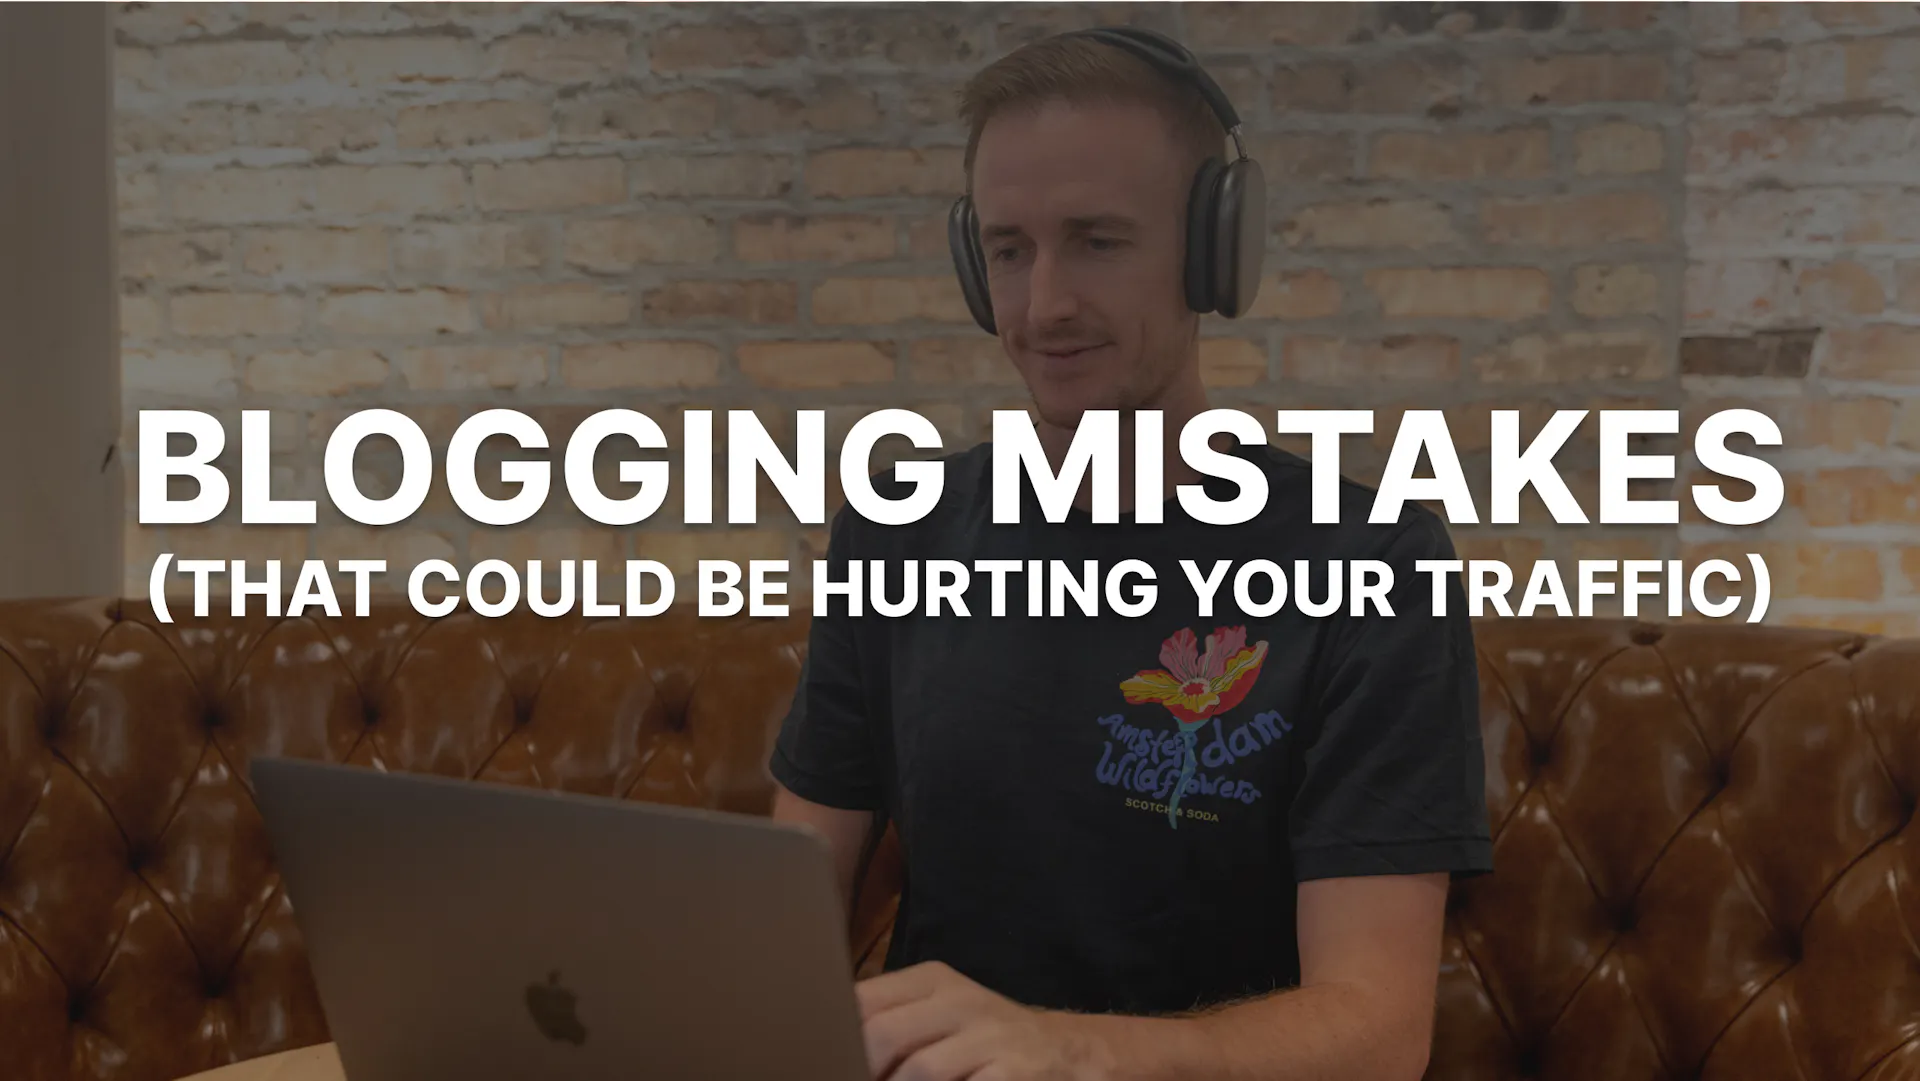 5 Blogging Mistakes That Could Be Hurting Your Traffic